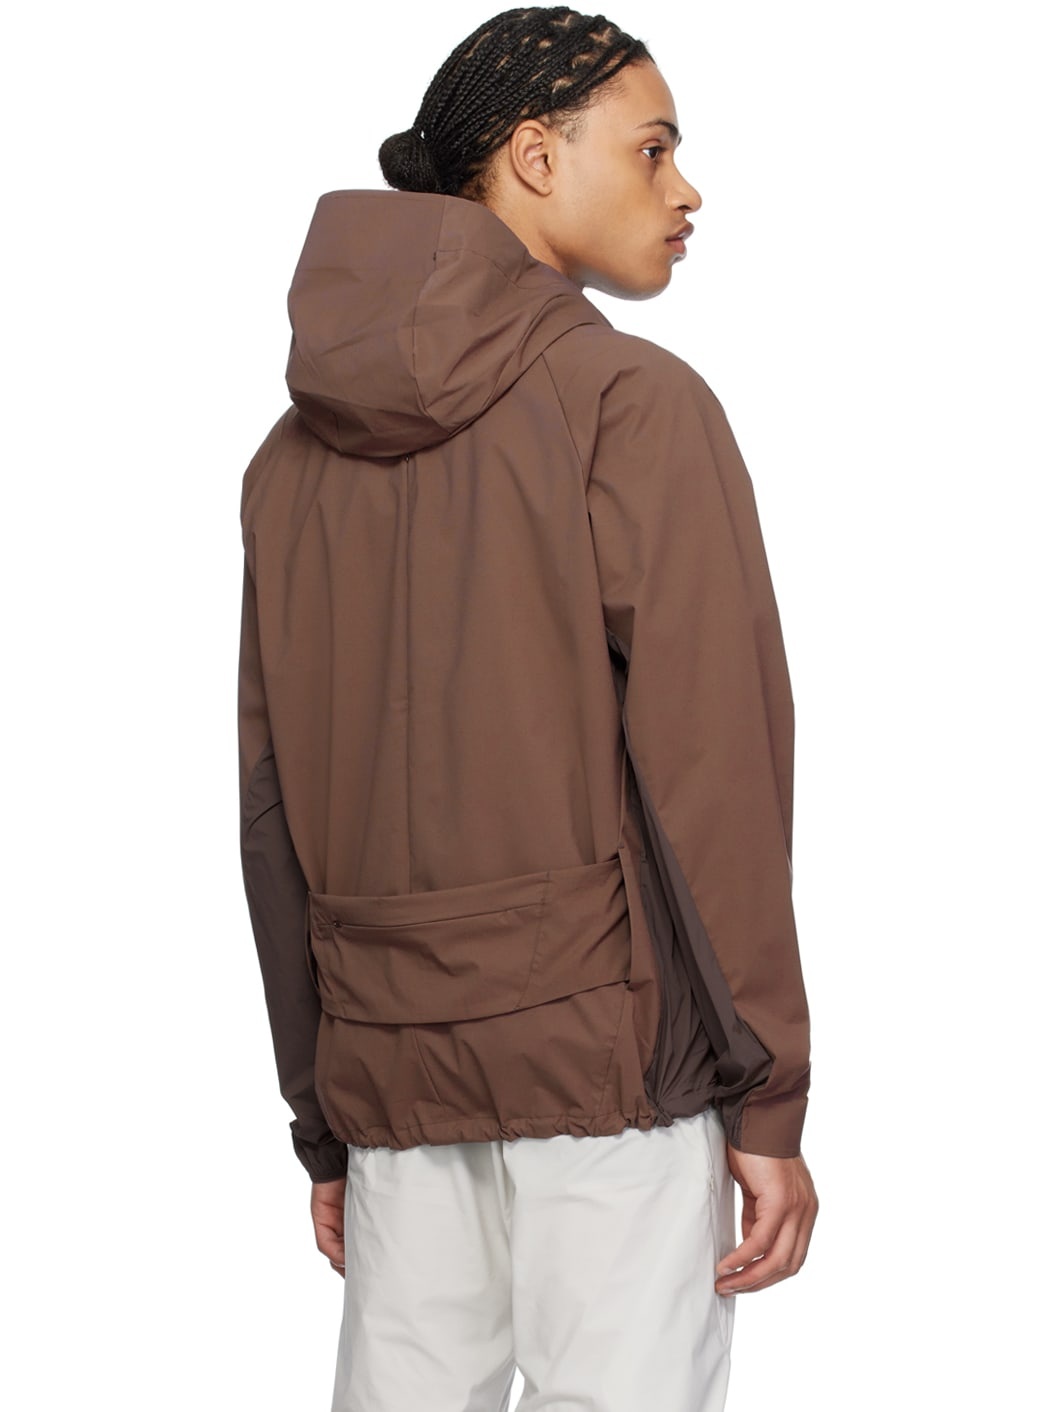 Brown 6.0 Right Technical Jacket - 3